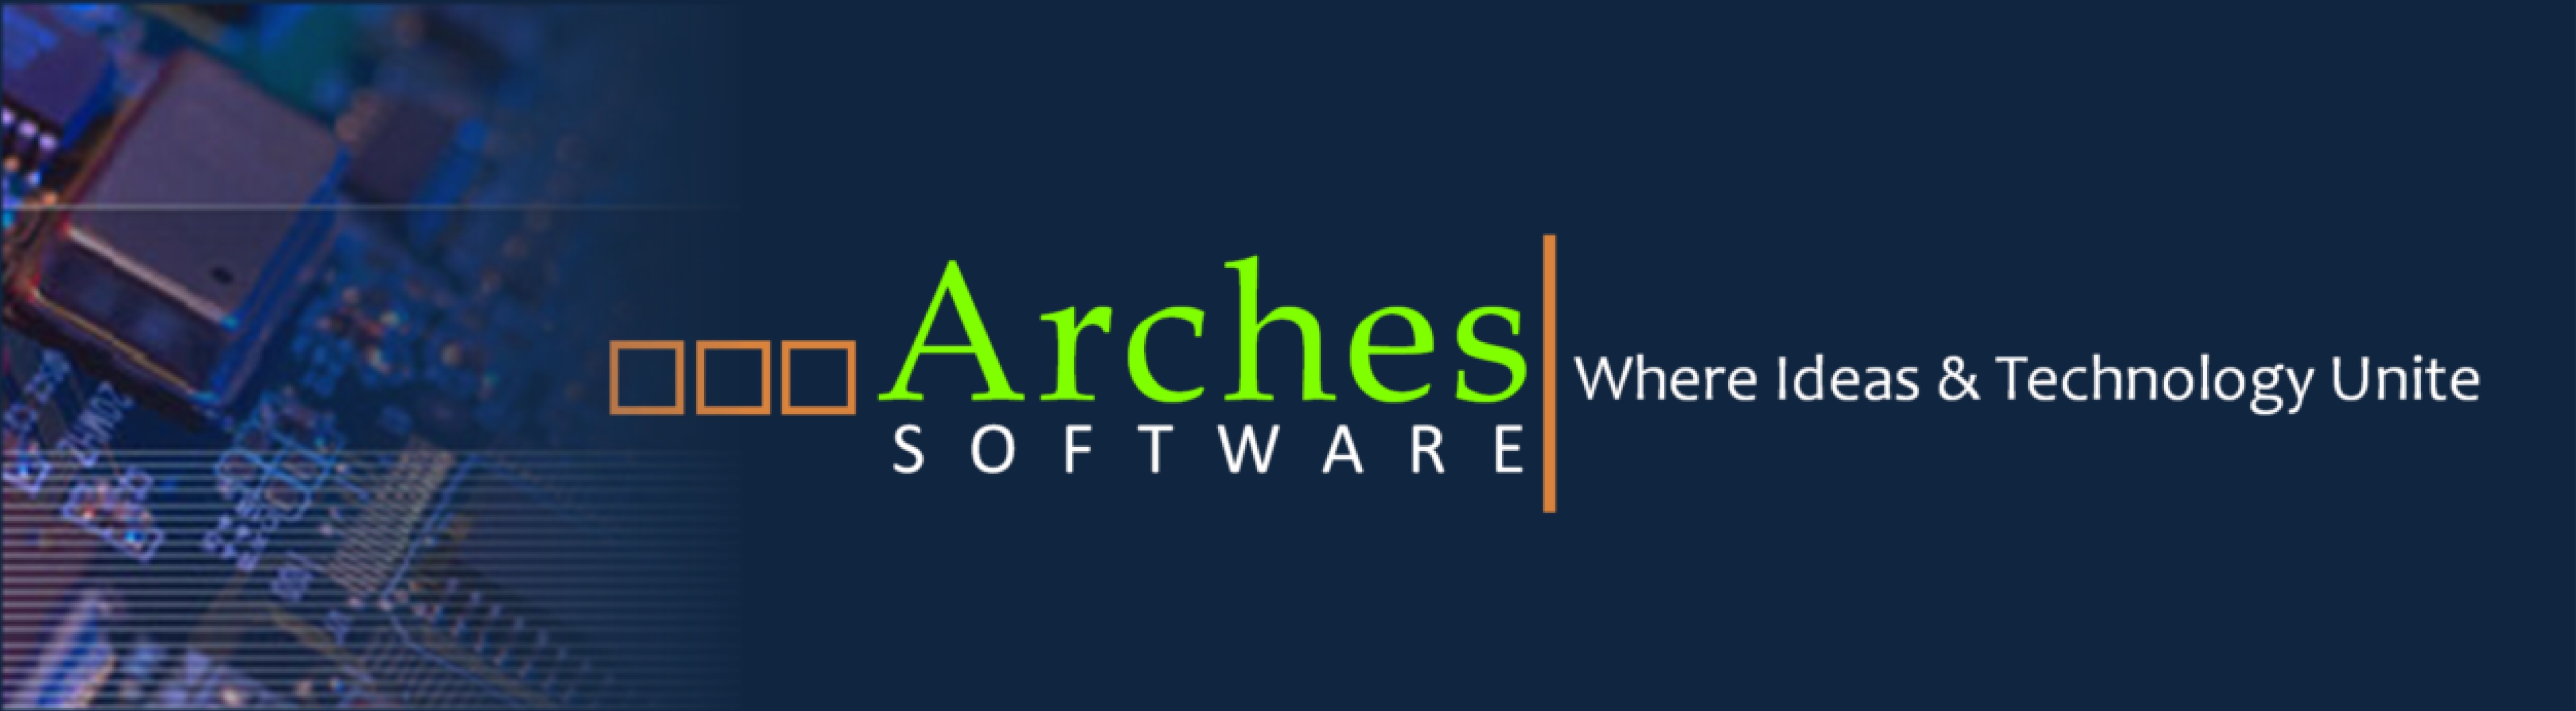 Arches Software | Where Ideas & Technology Unite